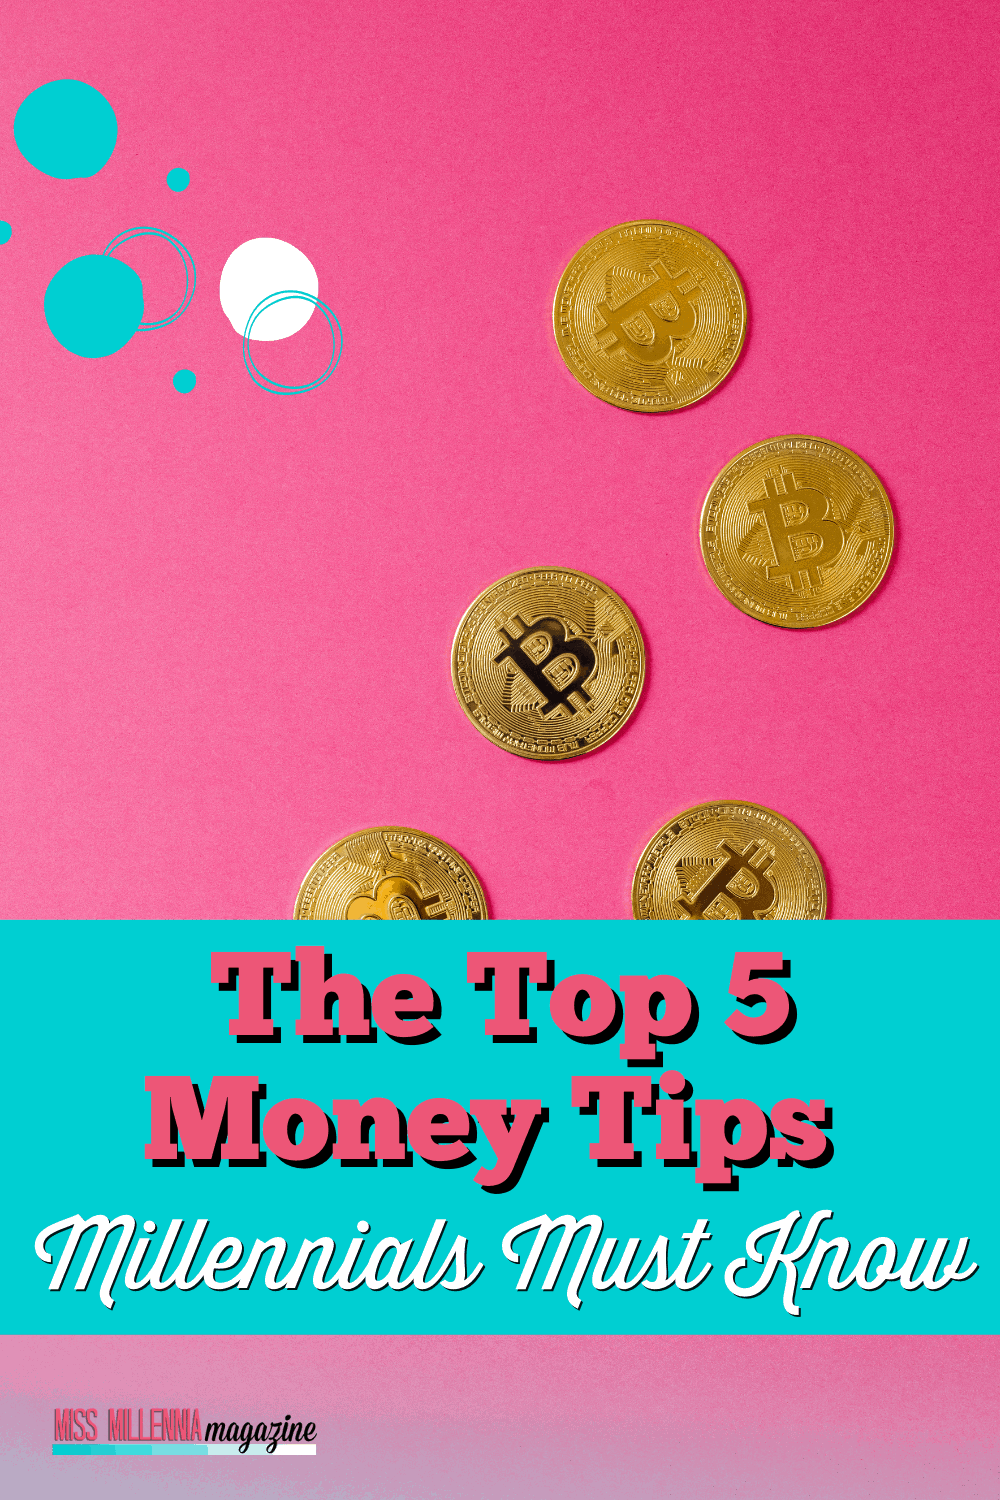 The Top 5 Money Tips Millennials Must Know